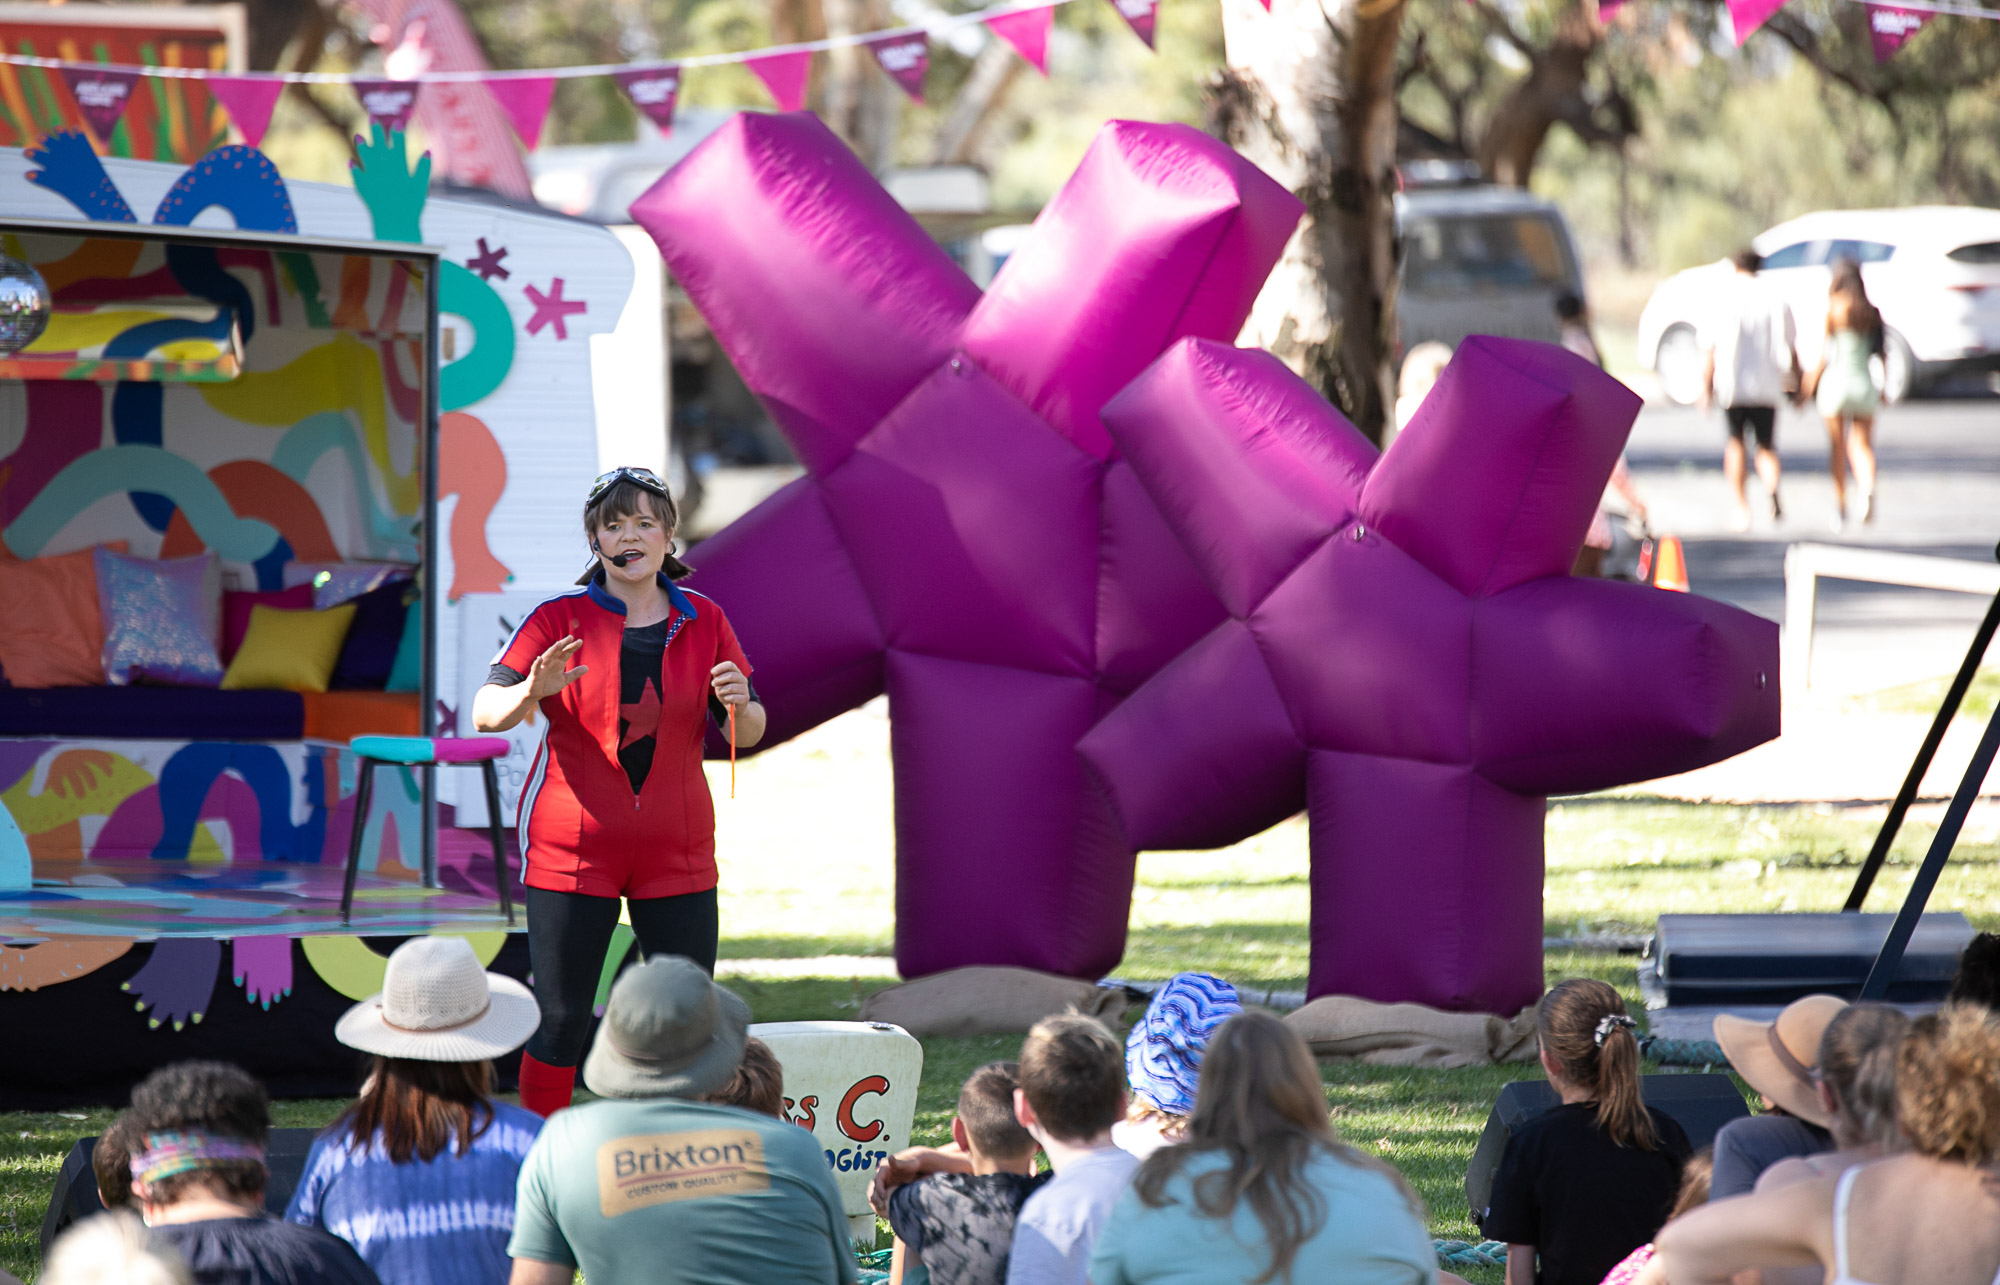 Artistic Inflatables used as stage props